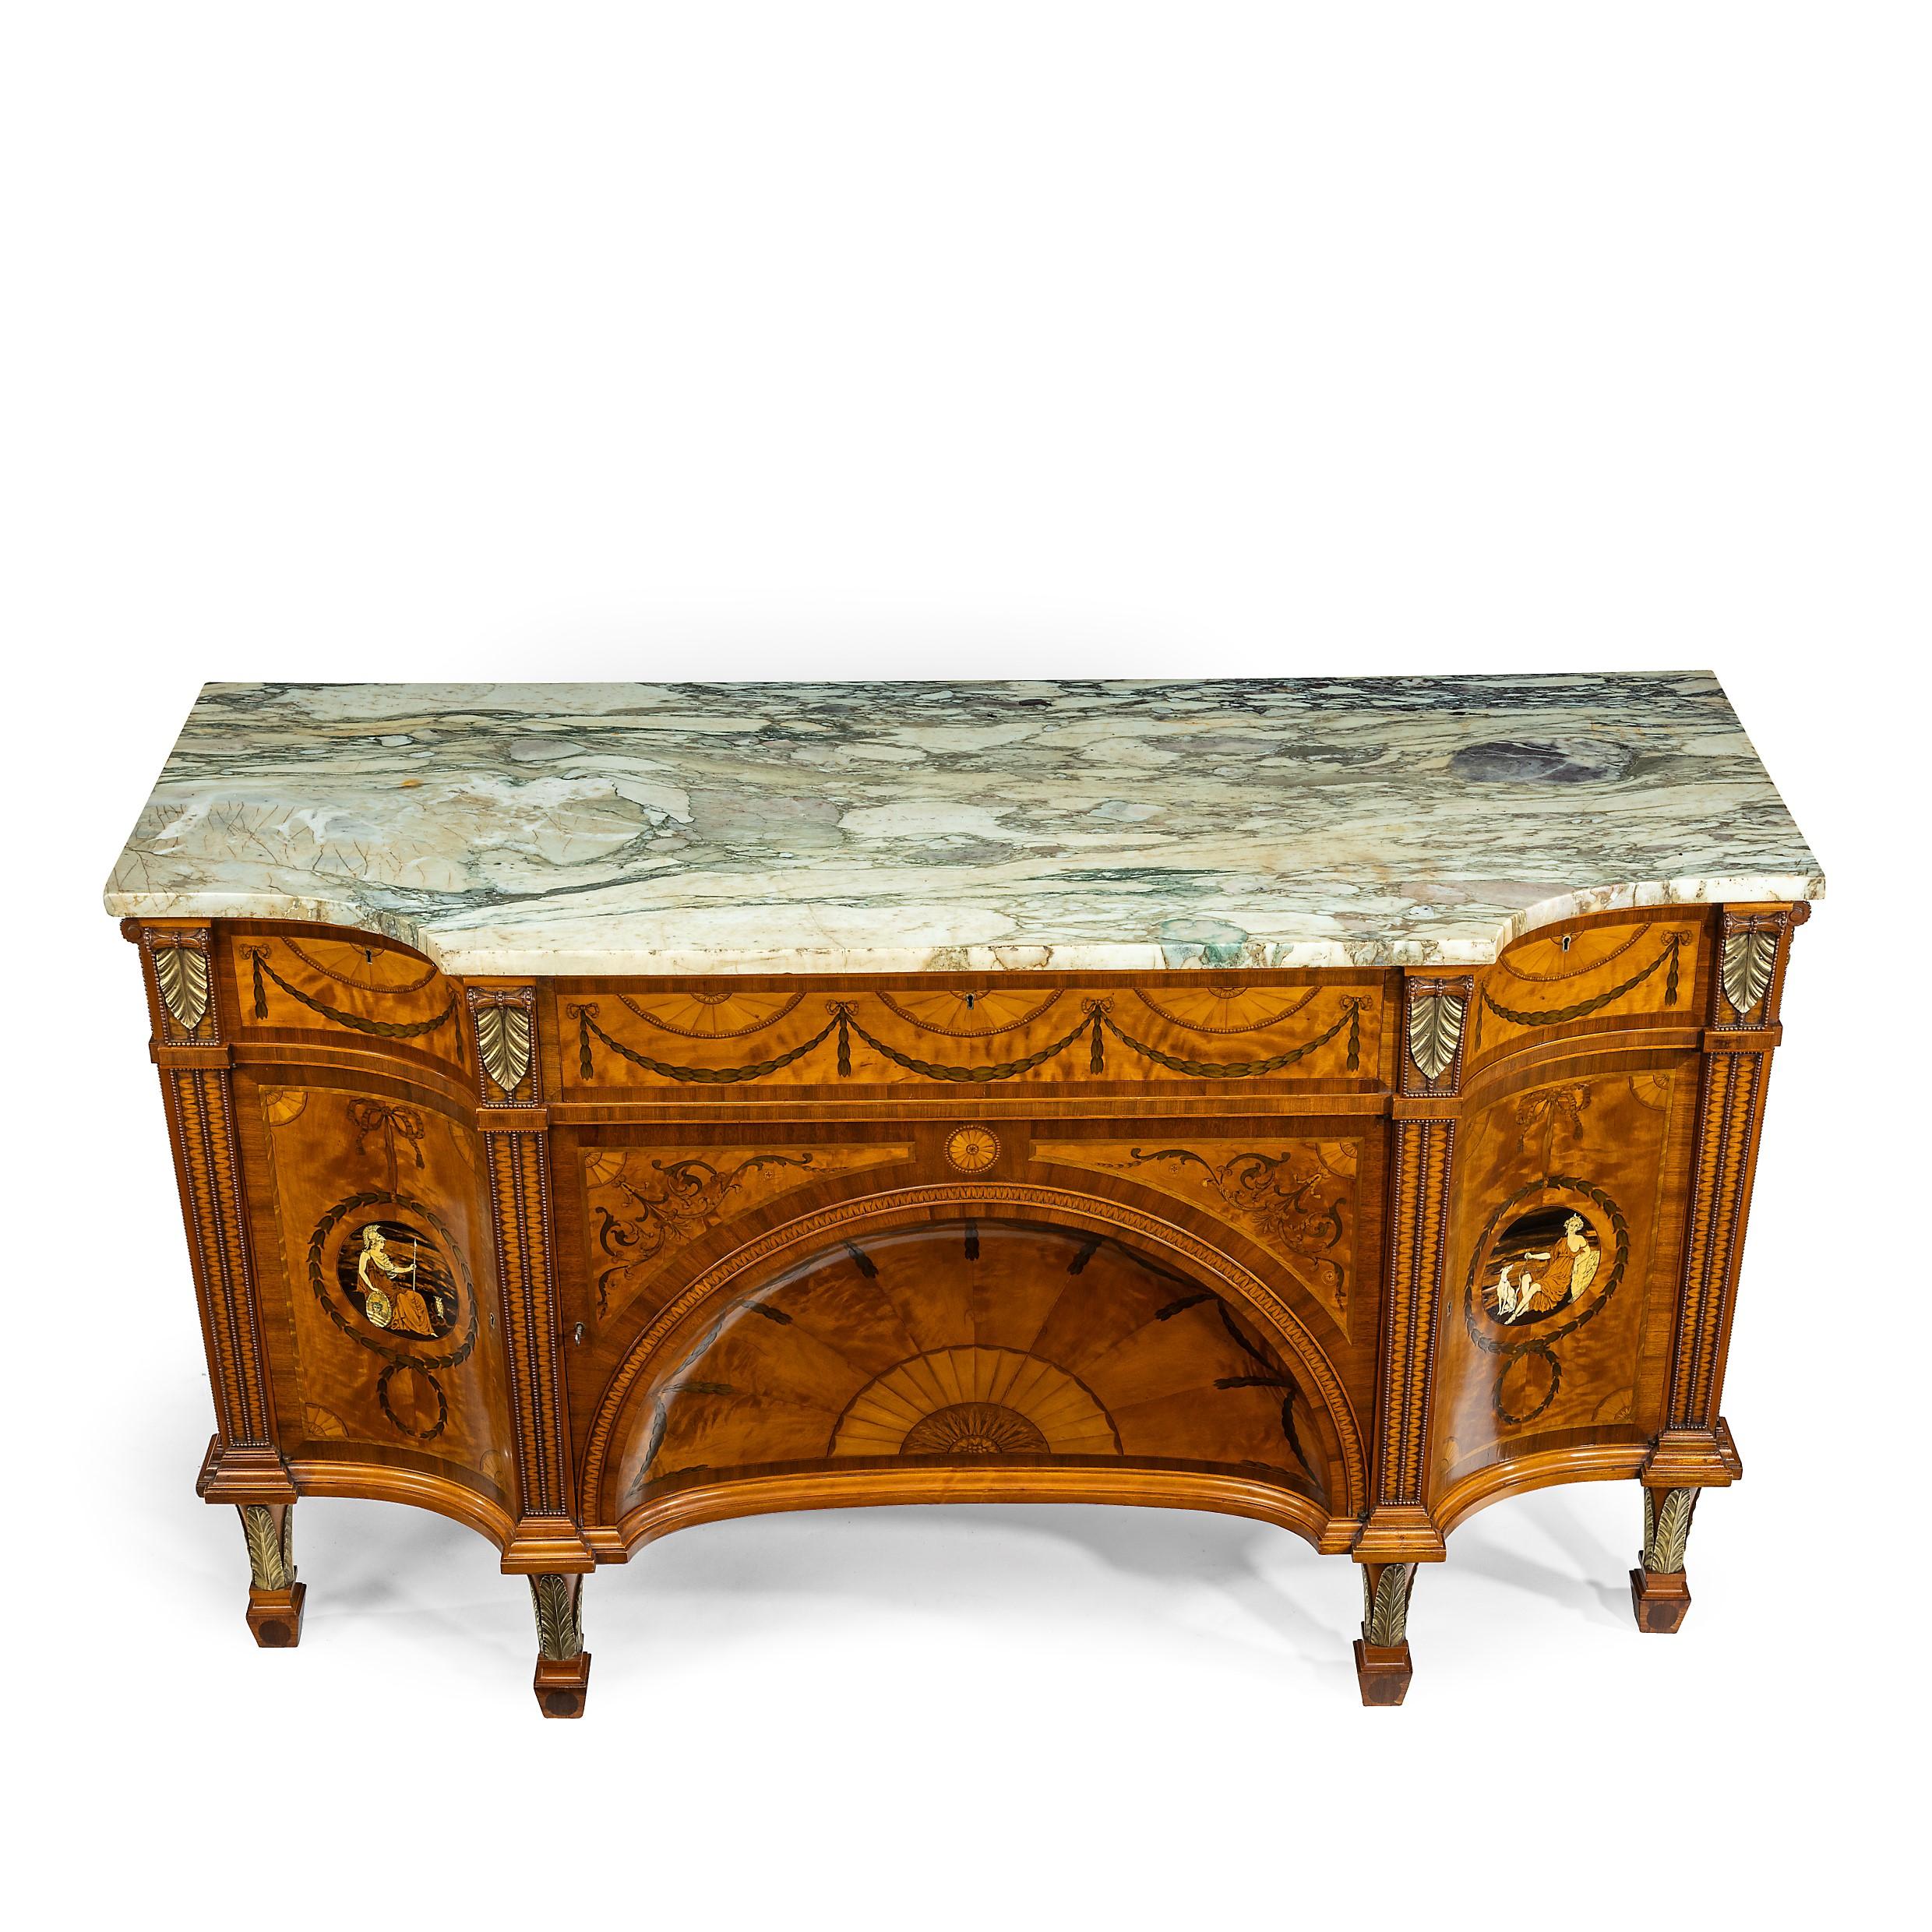 Early 20th Century Satinwood Sheraton Revival Breakfront Marquetry Commode For Sale